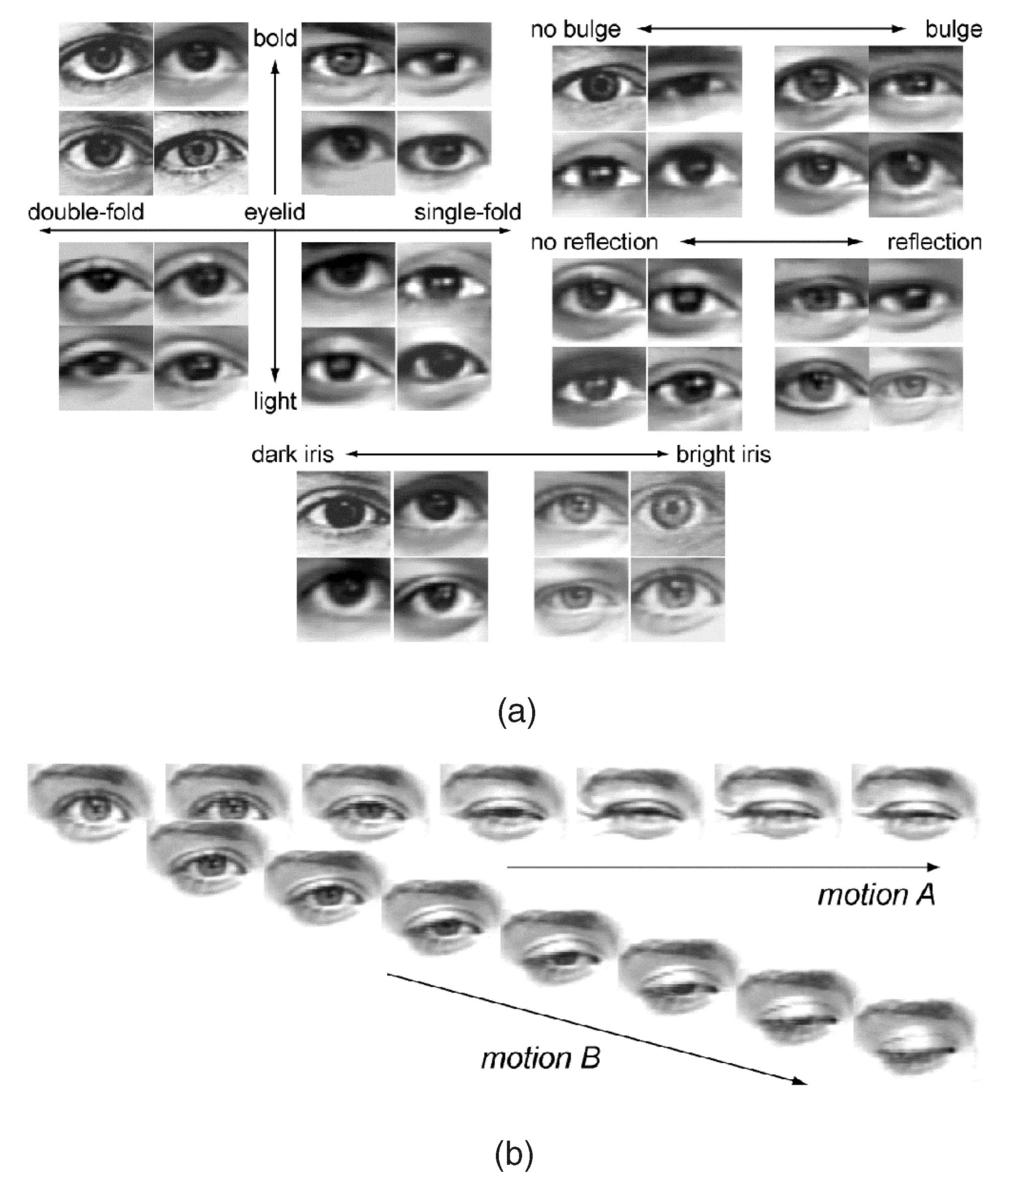 MORIYAMA ET AL.: METICULOUSLY DETAILED EYE REGION MODEL AND ITS APPLICATION TO ANALYSIS OF FACIAL IMAGES 739 Fig. 2. Multilayered 2D eye region model. 2.1.